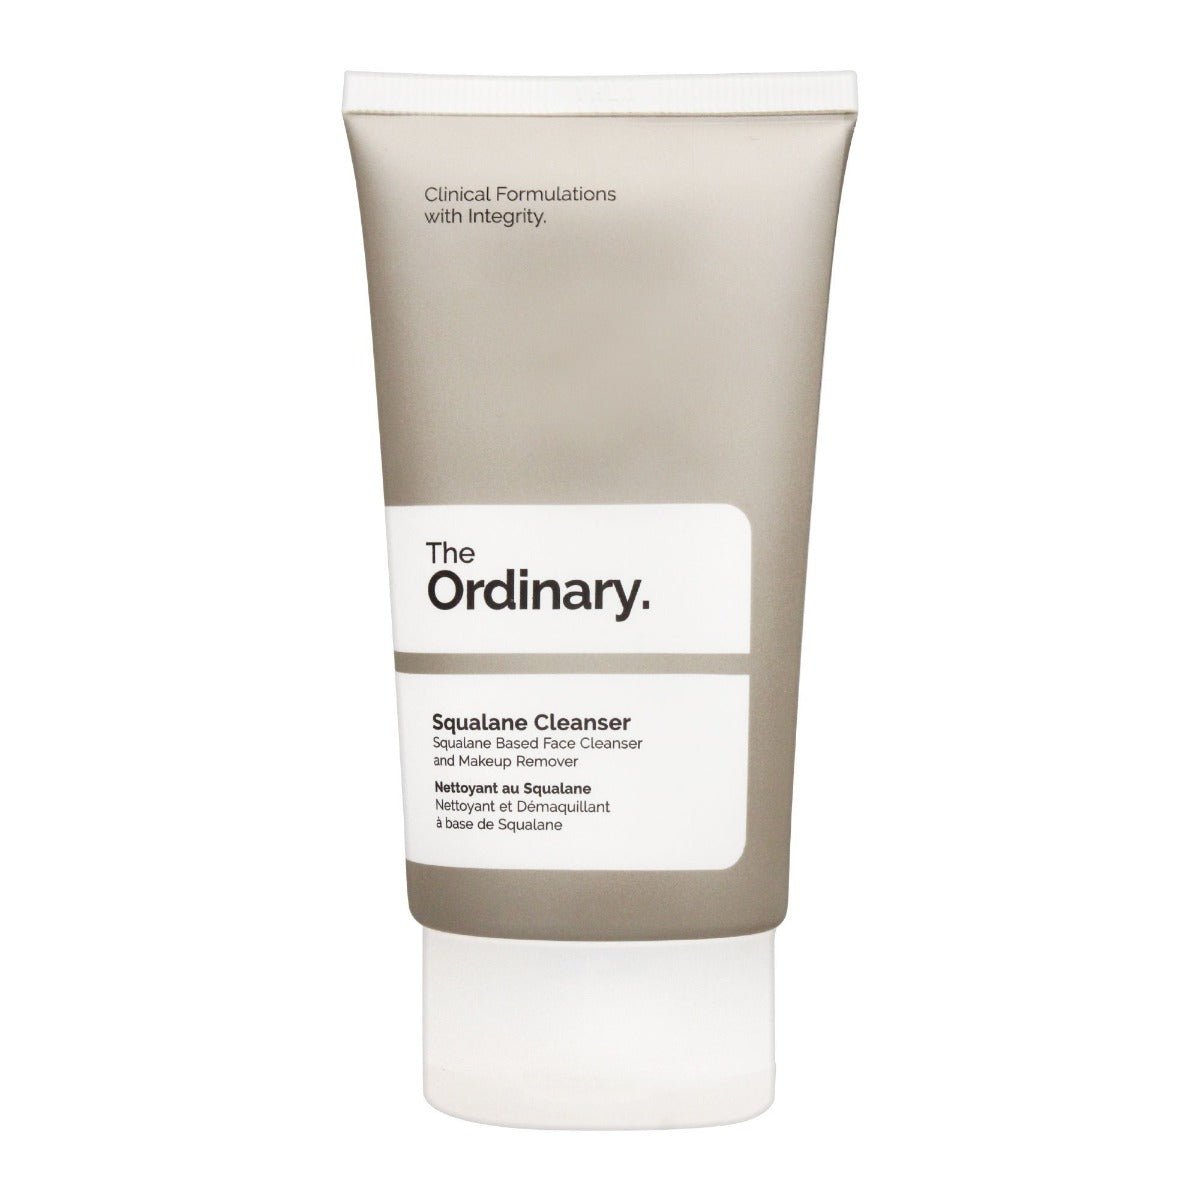 The Ordinary Squalane Cleanser 50Ml - AllurebeautypkThe Ordinary Squalane Cleanser 50Ml